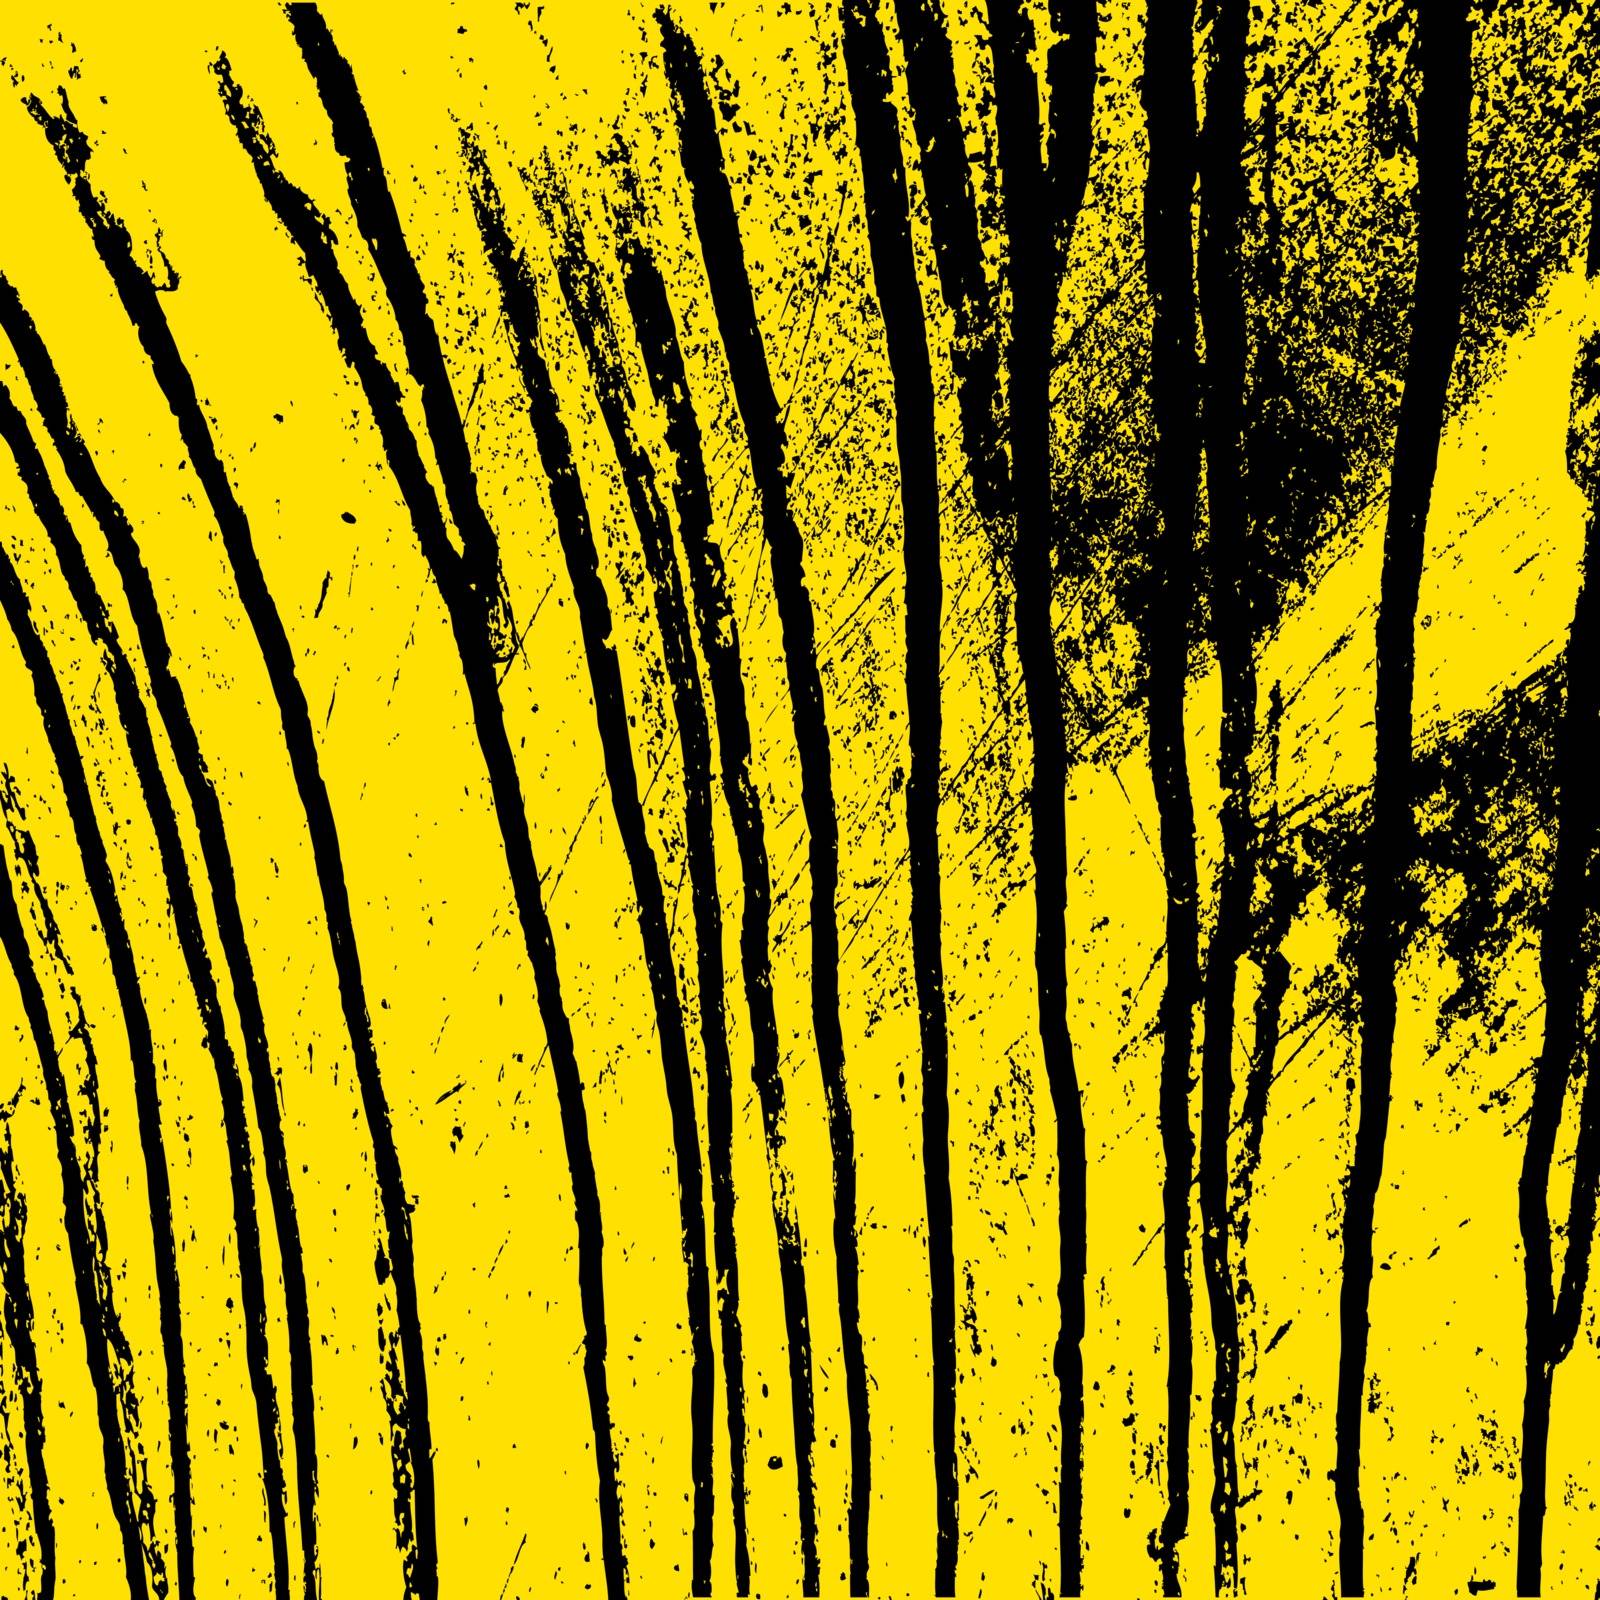 Texture yellow wall with black streaks stains. Vector illustra by aarrows